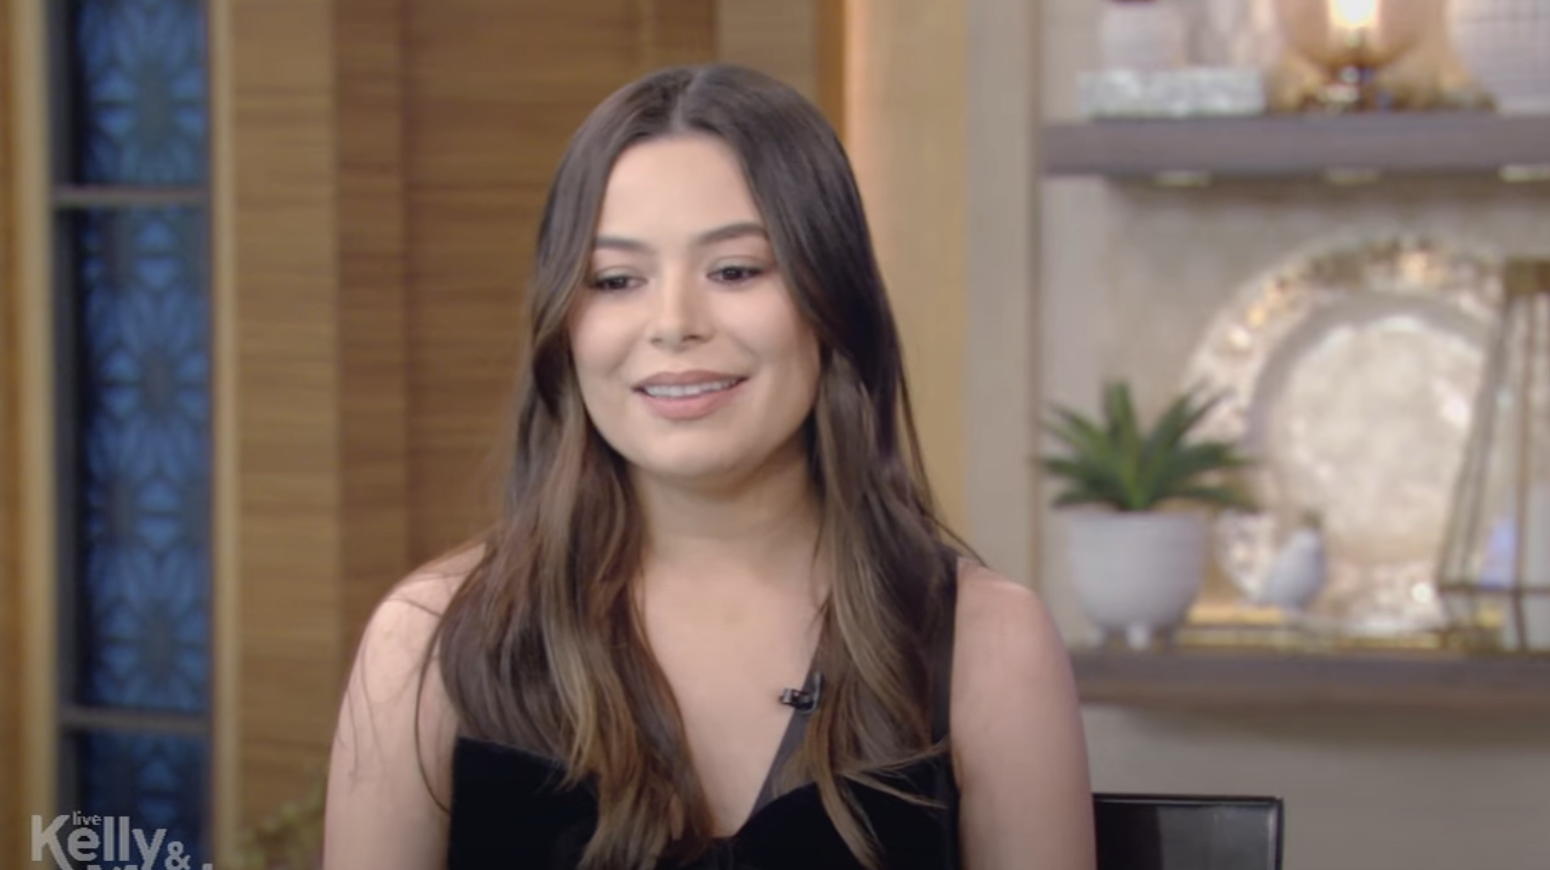 Miranda Cosgrove smiling, wearing a black top, on the set of a talk show